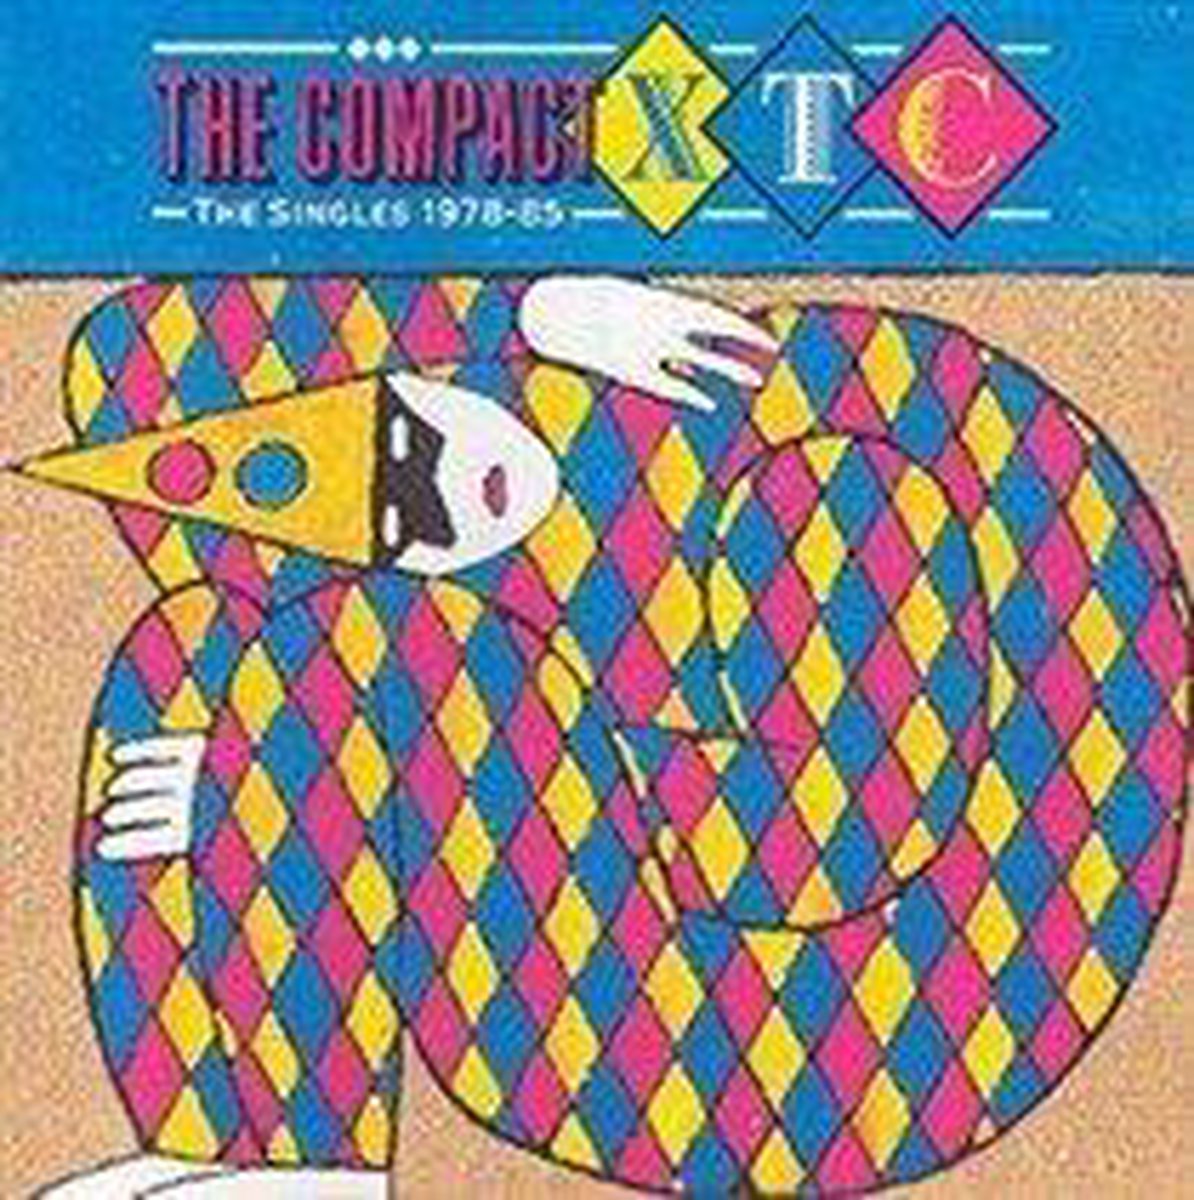 Singles Collection 78-85 - Xtc